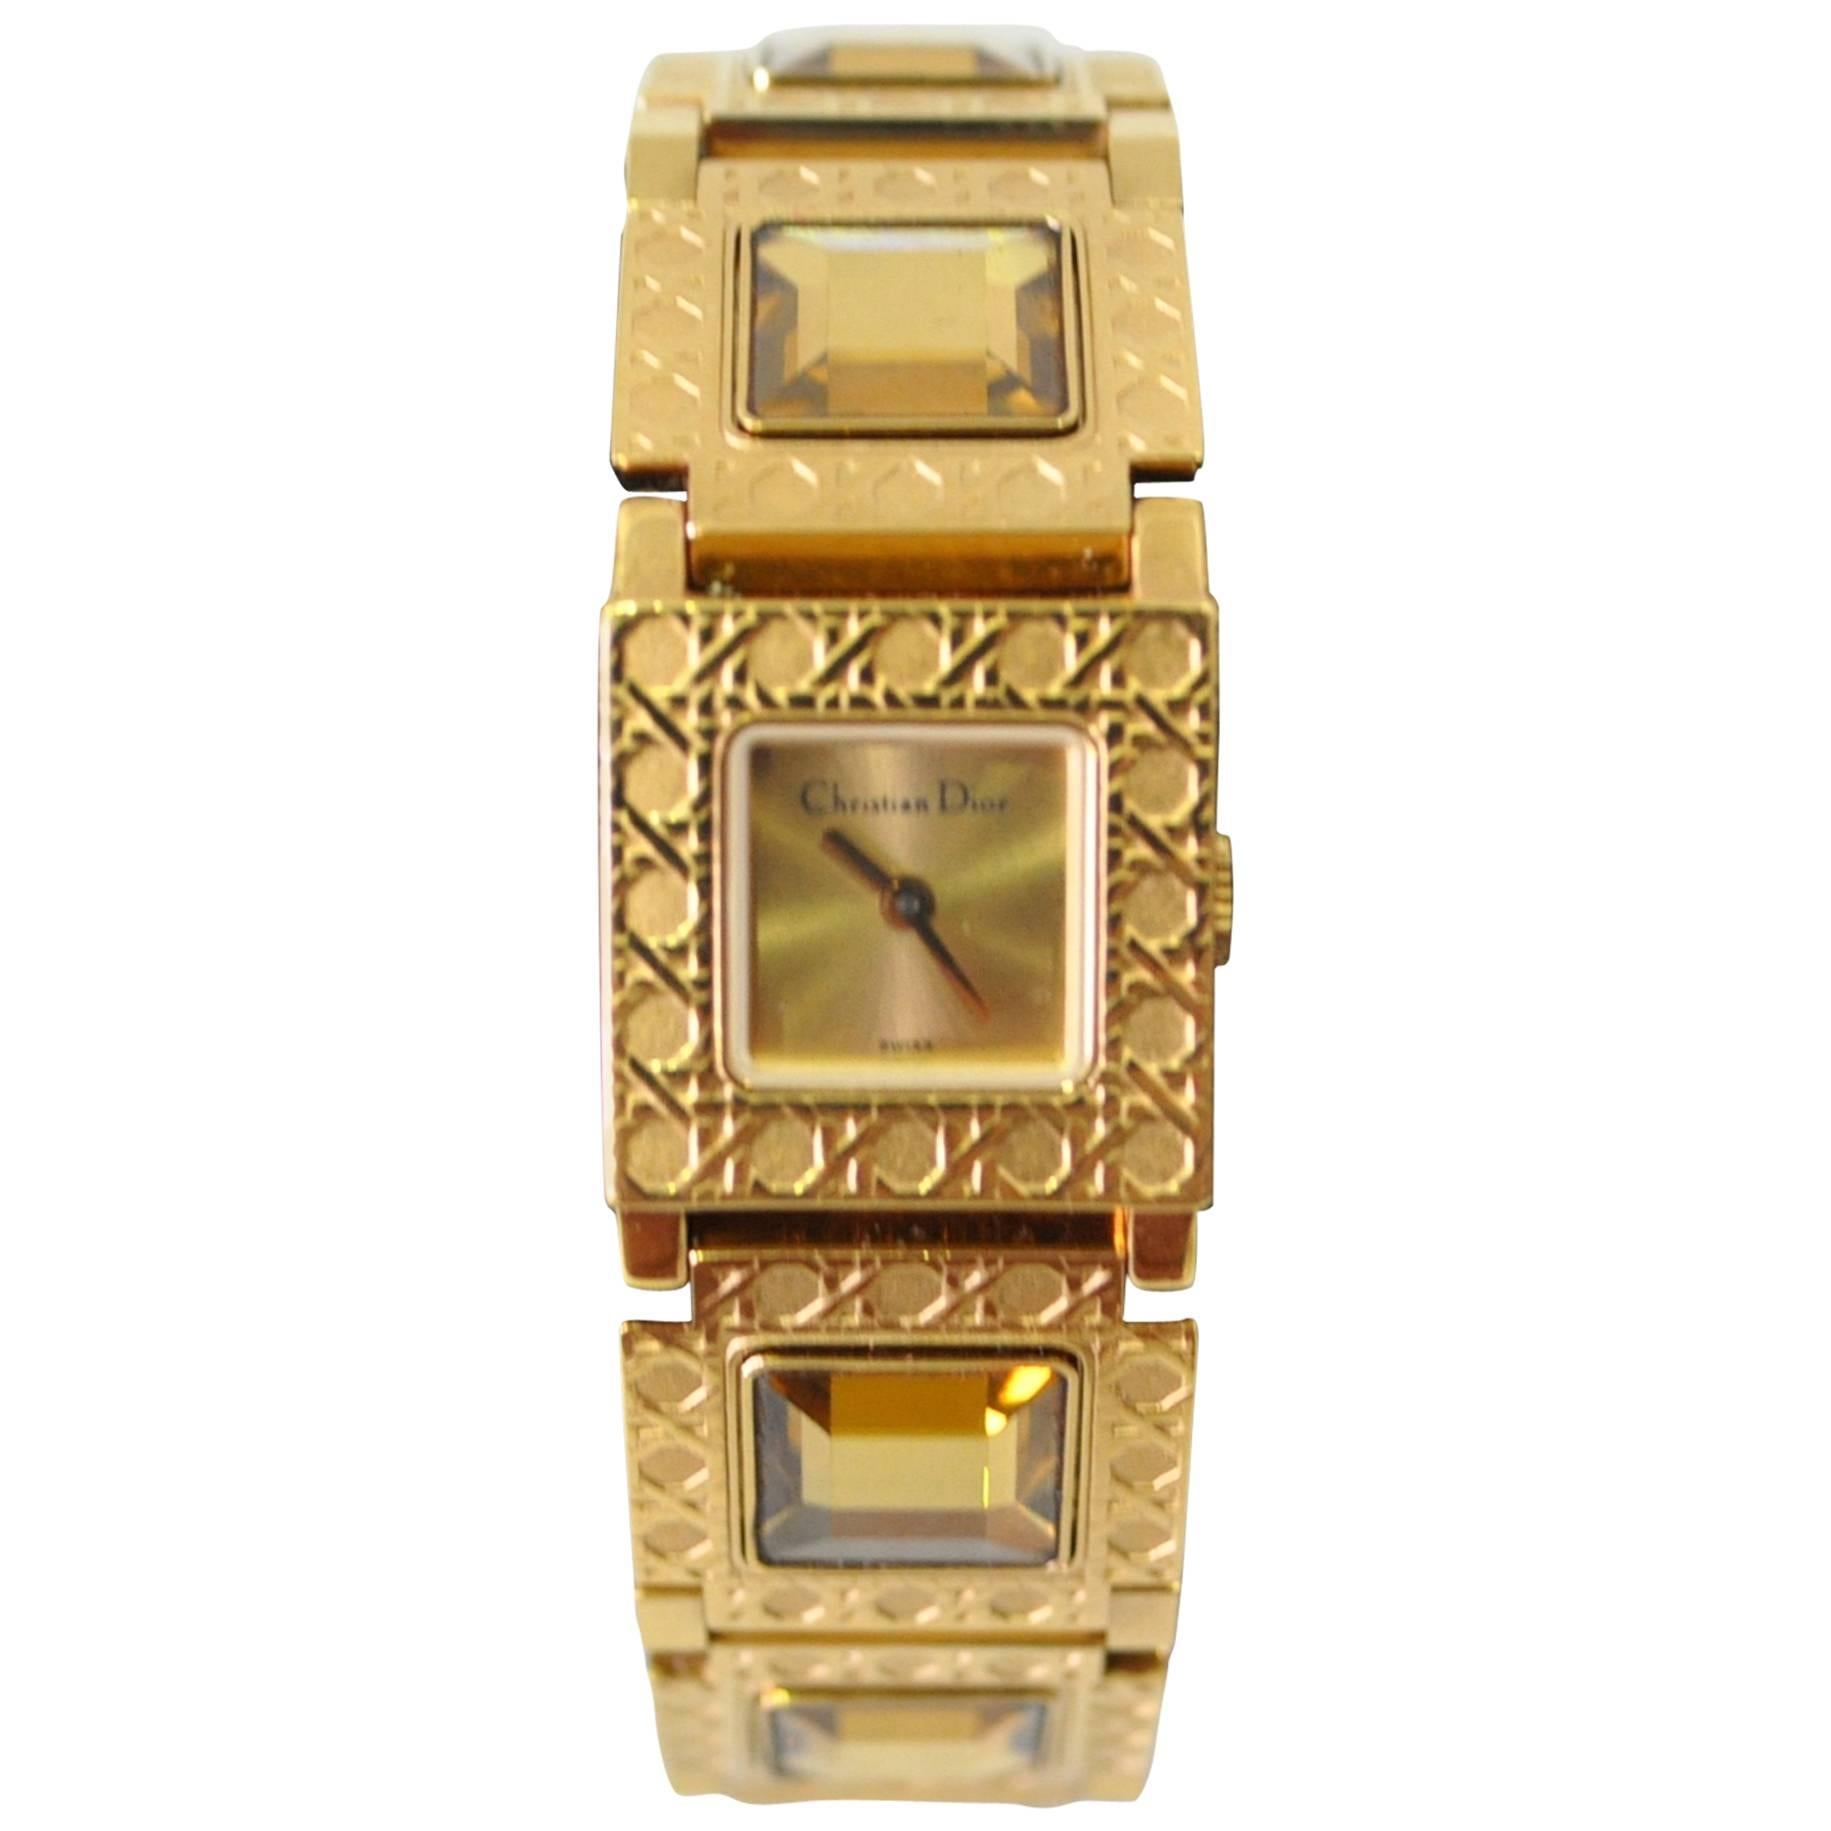 Authentic Christian Dior Jewel Encrusted Gold Tone Link Watch For Sale